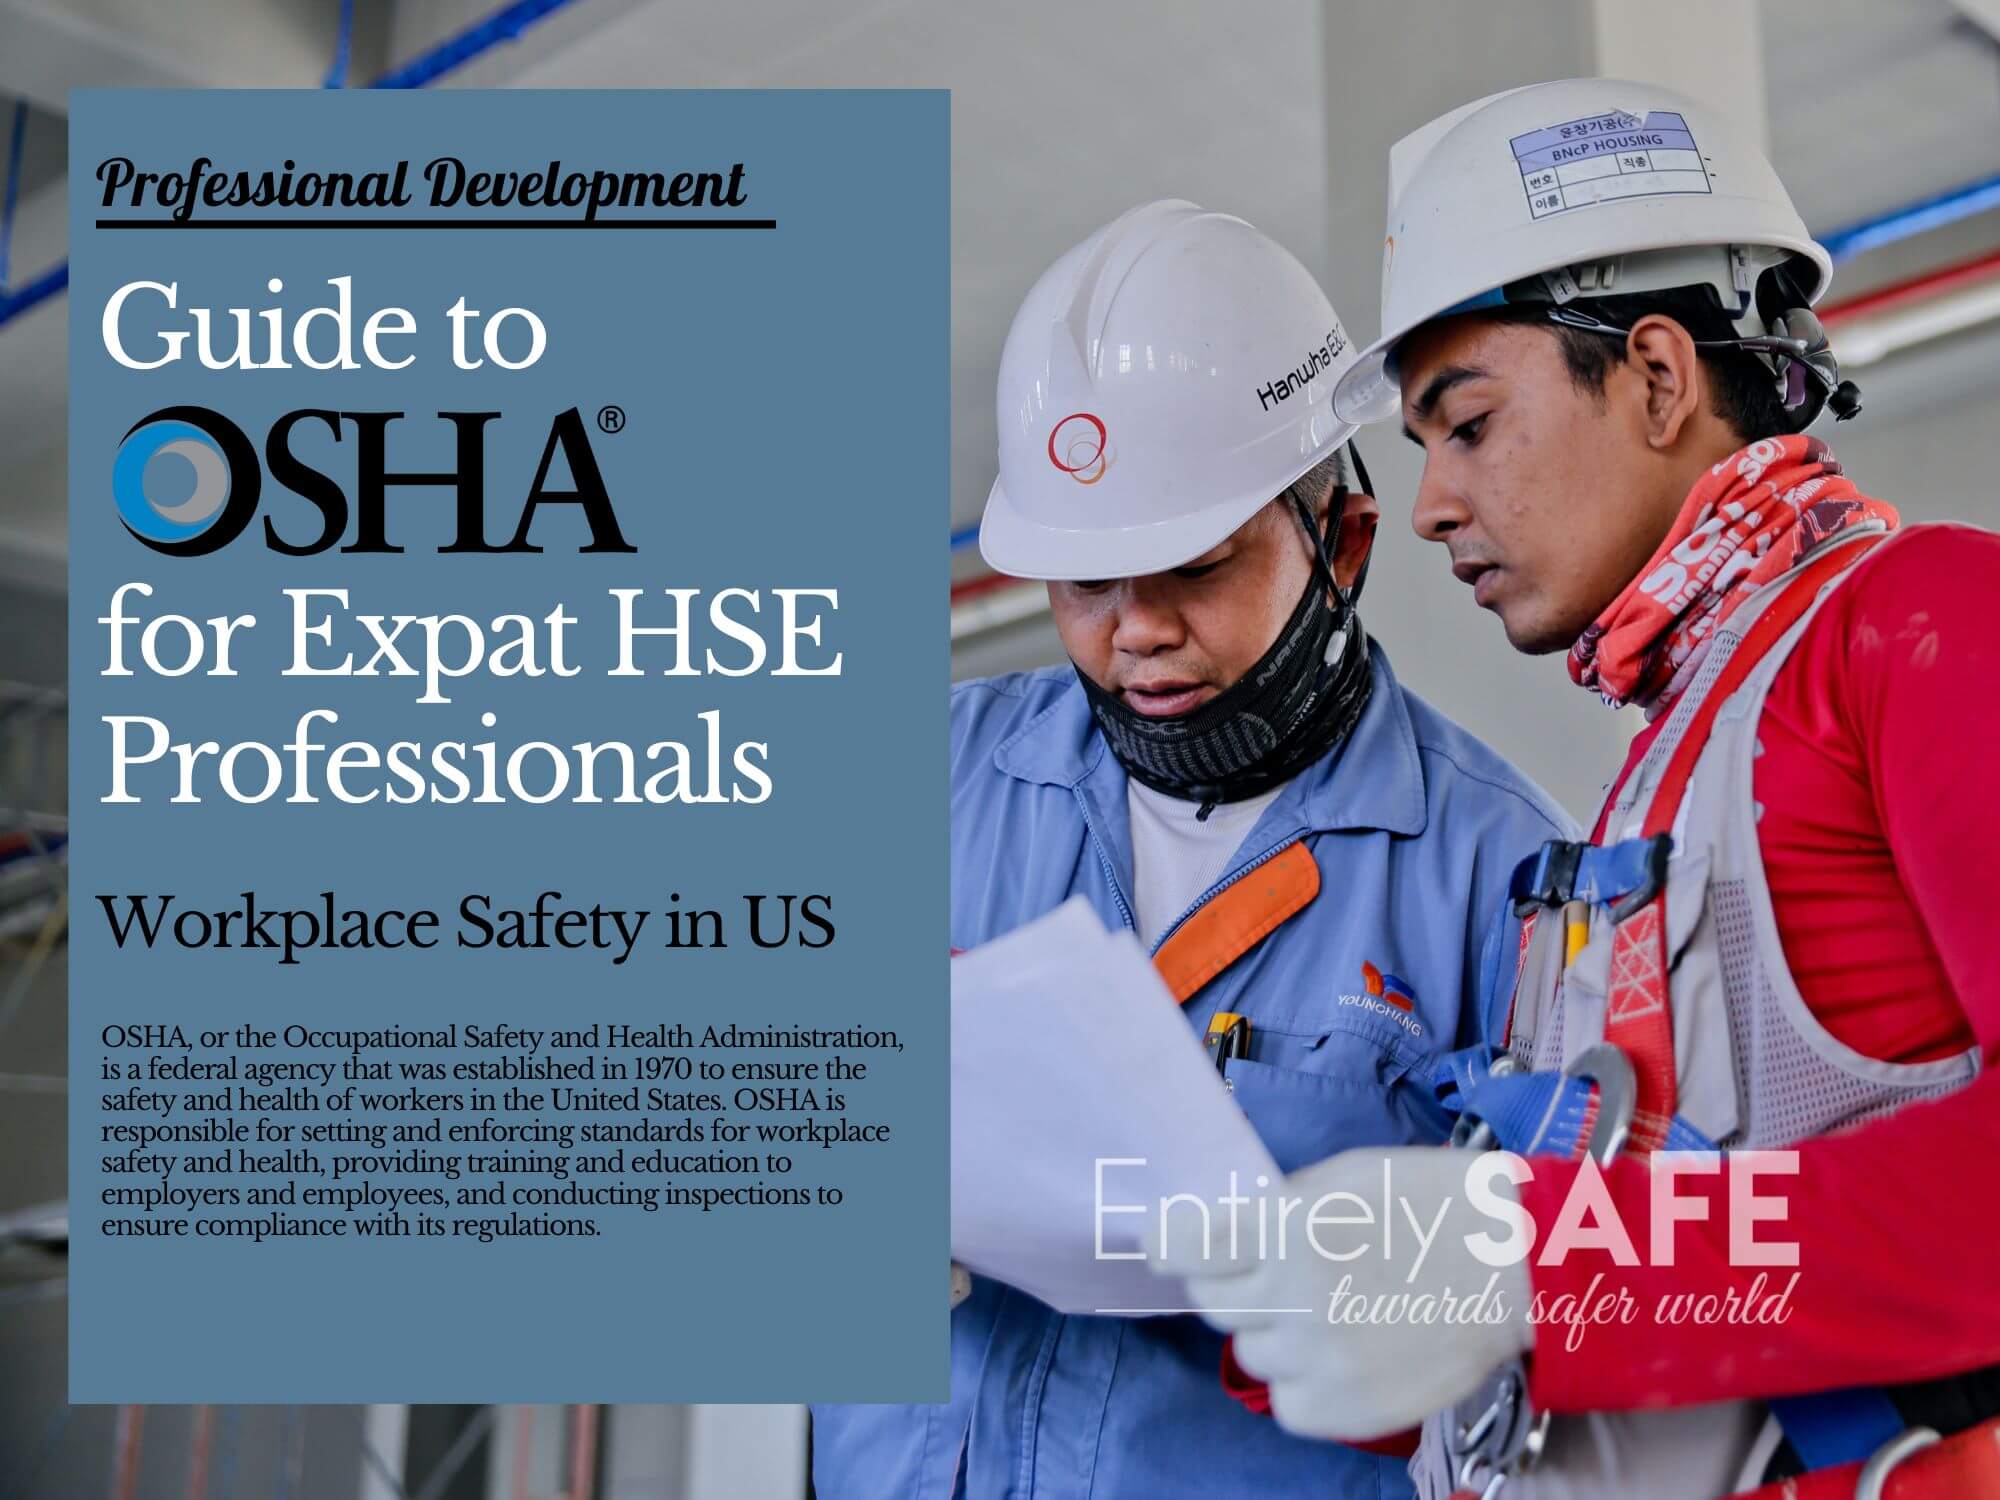 Guide to OSHA for Expat HSE Professionals (1)